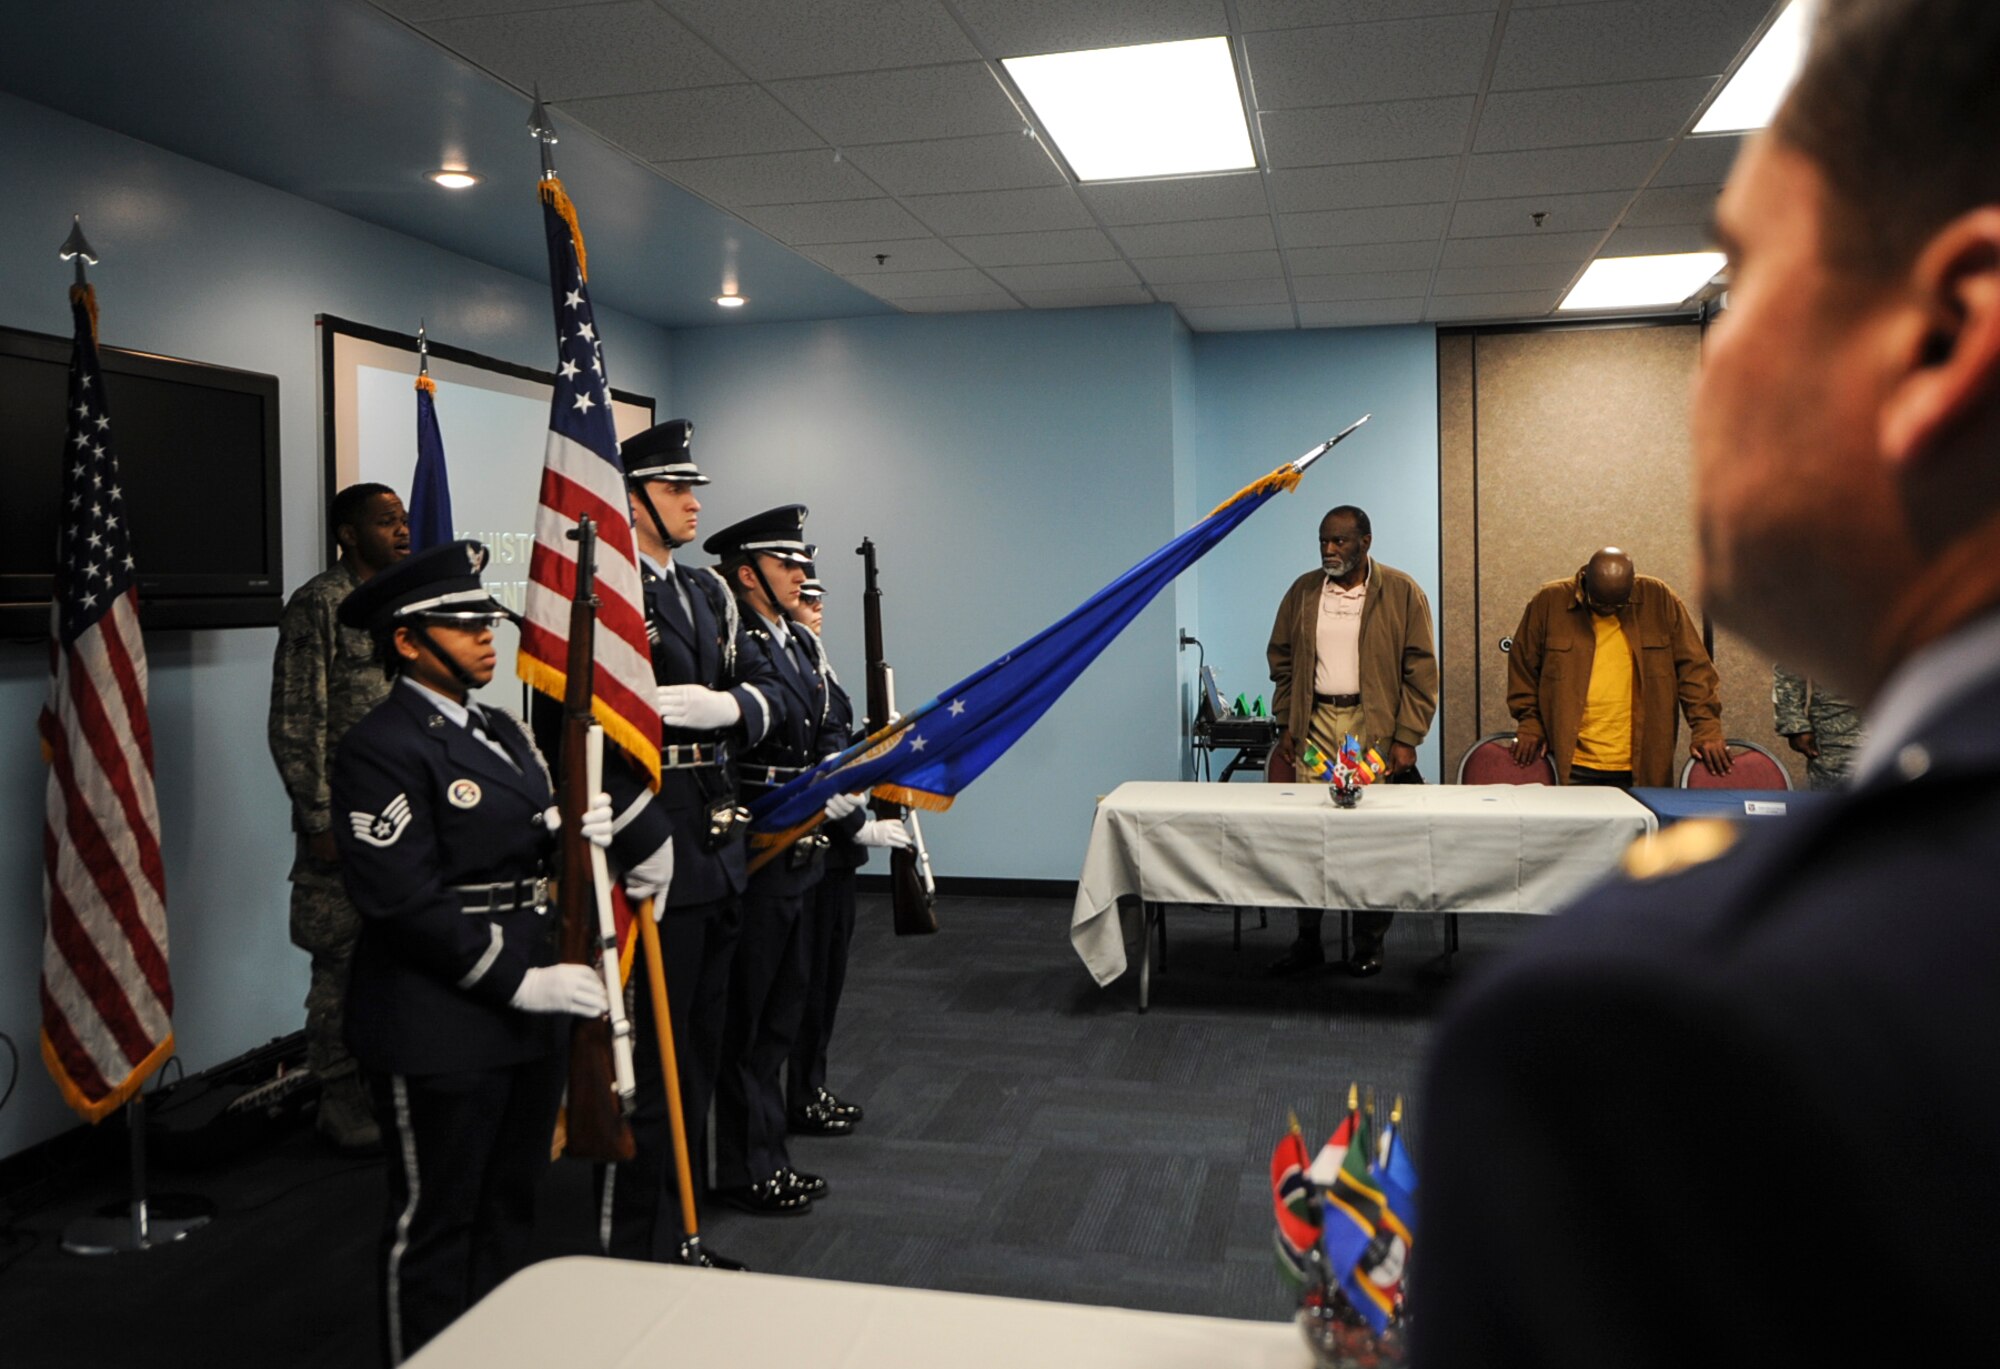 The Moody Air Force Base honor guard presents the colors during the Black History Month luncheon Feb. 27, 2015, Moody AFB, Ga. The annual luncheon was held to honor African-American heritage and how it shaped U.S. history. (U.S. Air Force photo by Senior Airman Olivia Bumpers/Released)